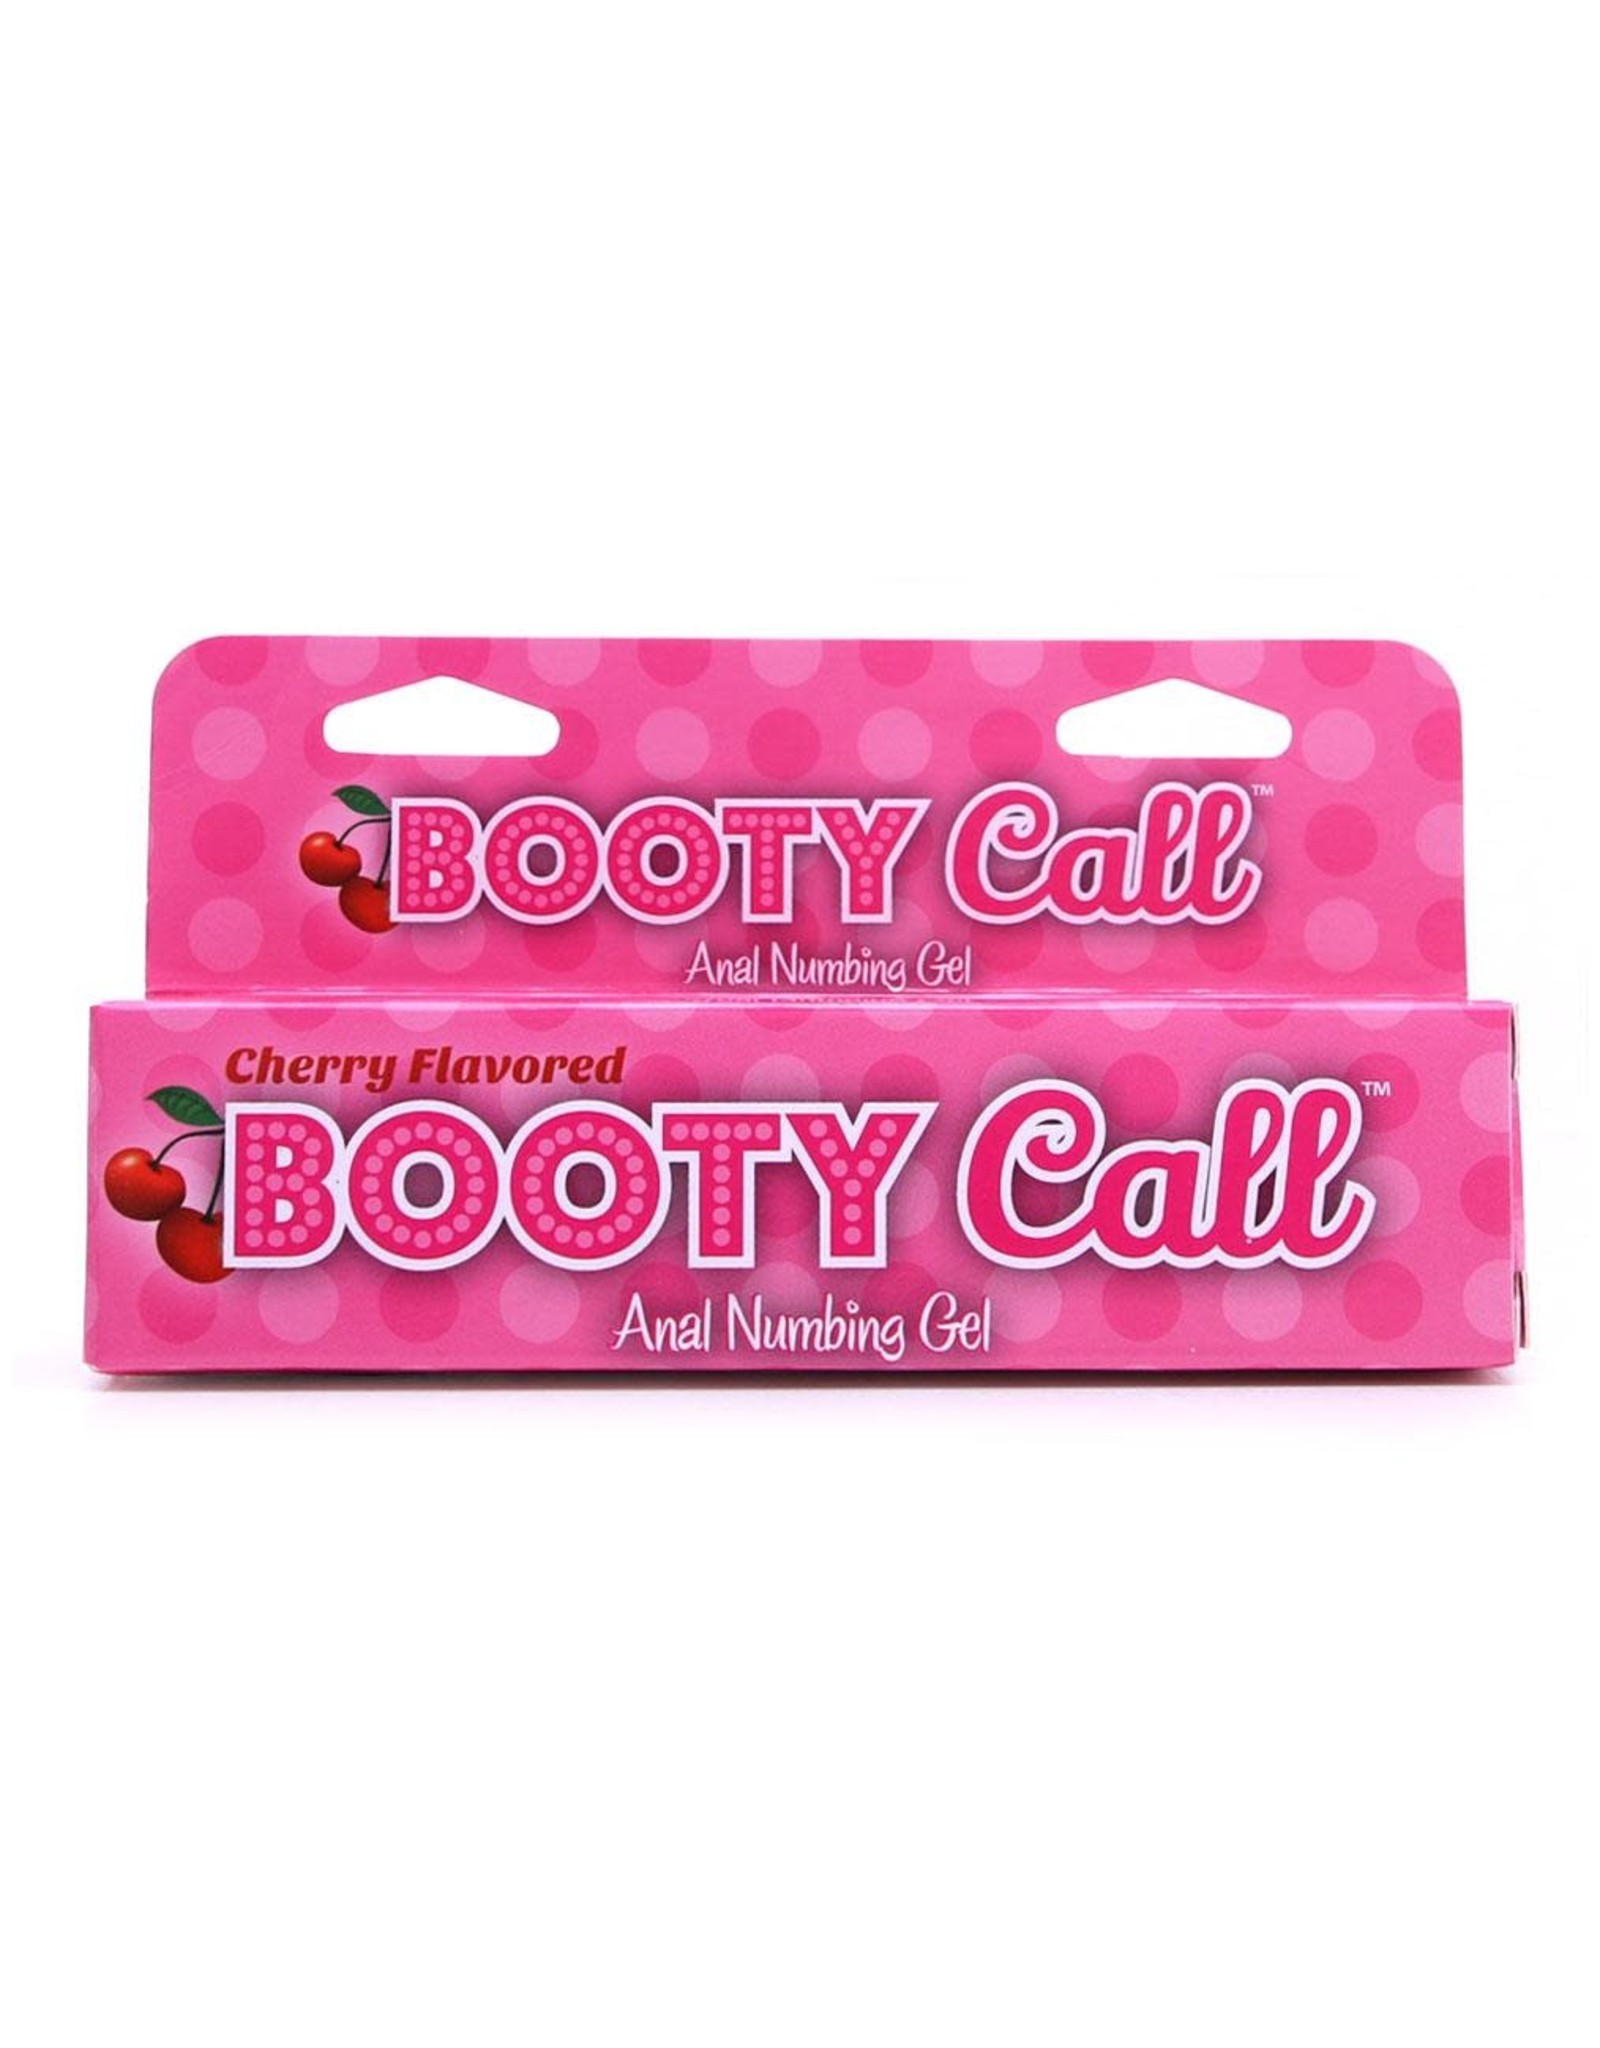 Little Genie Booty Call - Anal Numbing Gel - Cherry Flavored